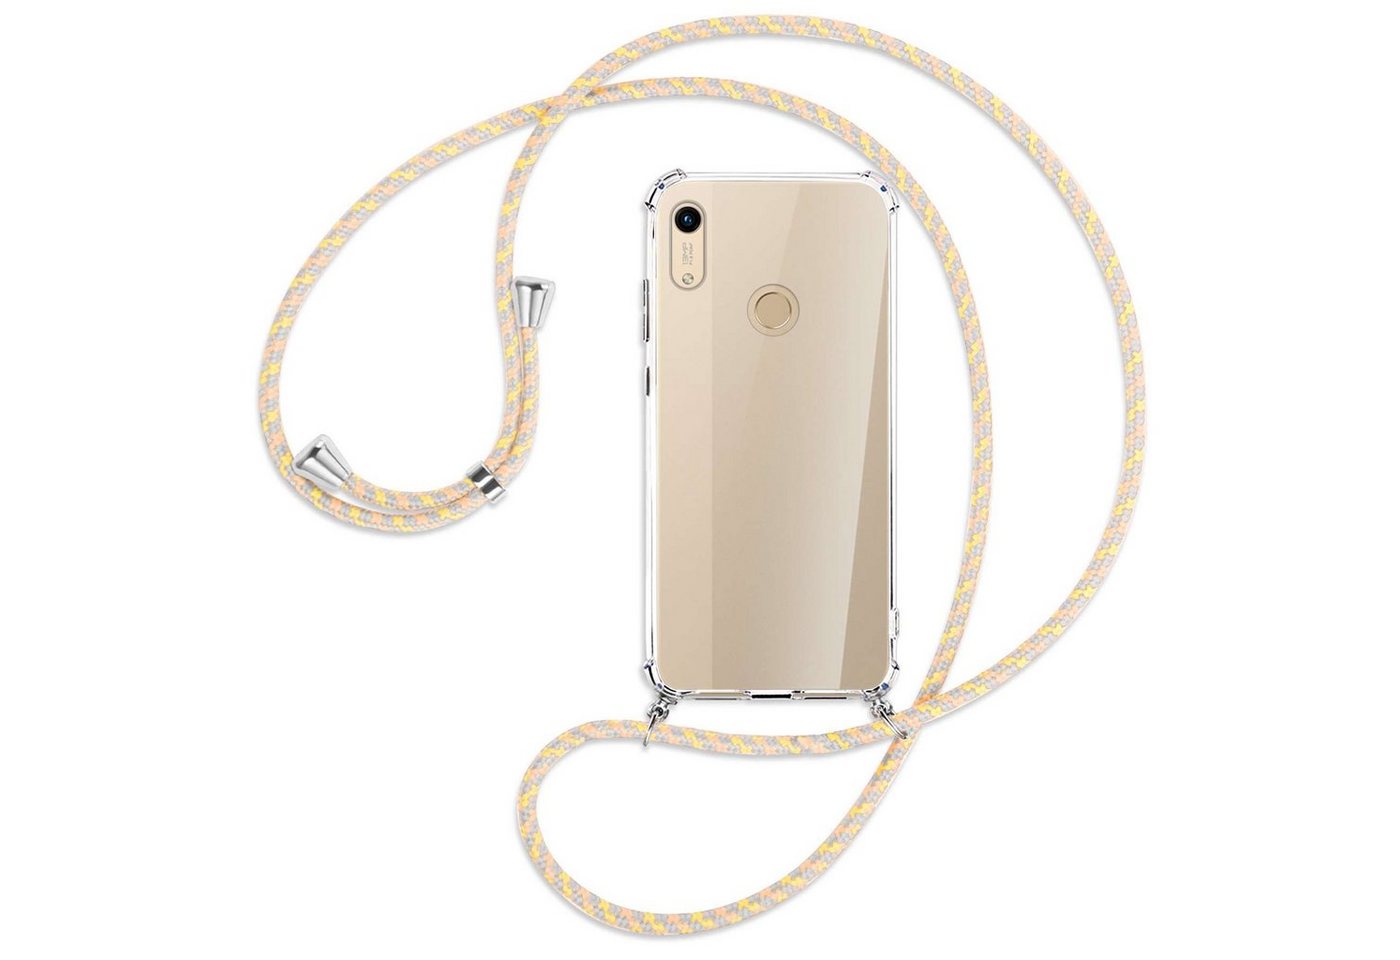 mtb more energy Handykette für Honor 8A, Huawei Y6s 2019 (6.09) [S], Umhängehülle mit Band [NC-096-S] von mtb more energy